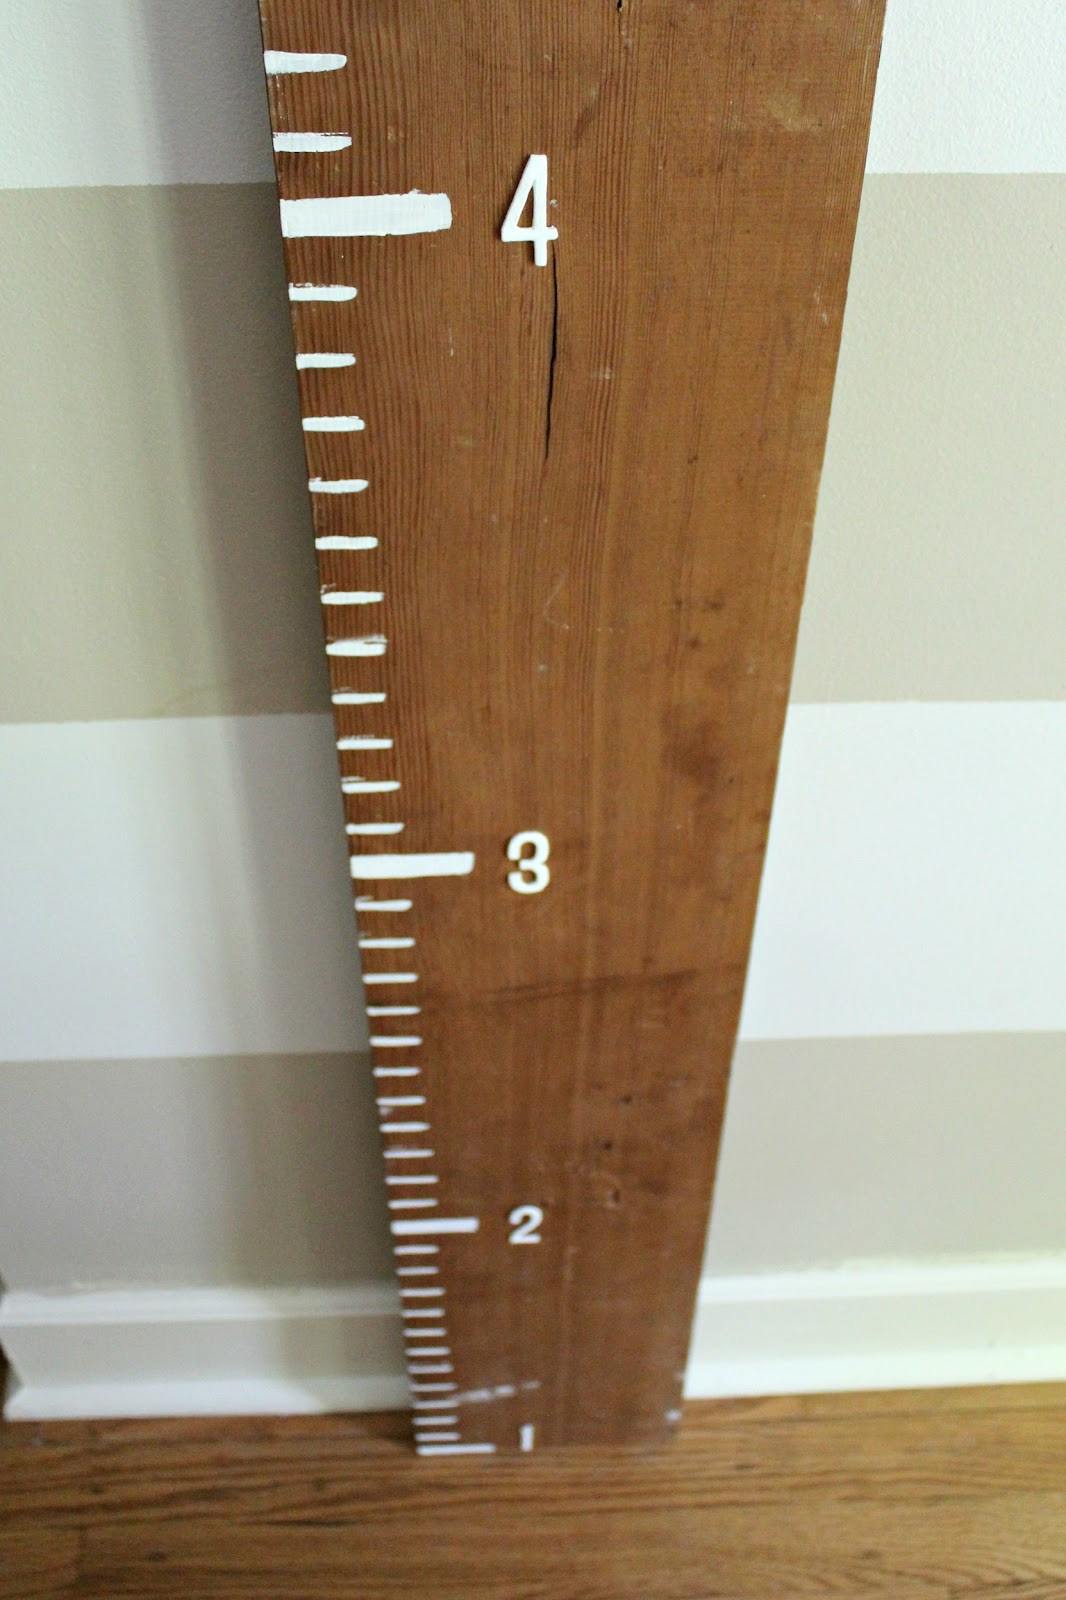 Best ideas about Wooden Growth Chart DIY
. Save or Pin Ten June DIY Wooden Growth Chart Now.